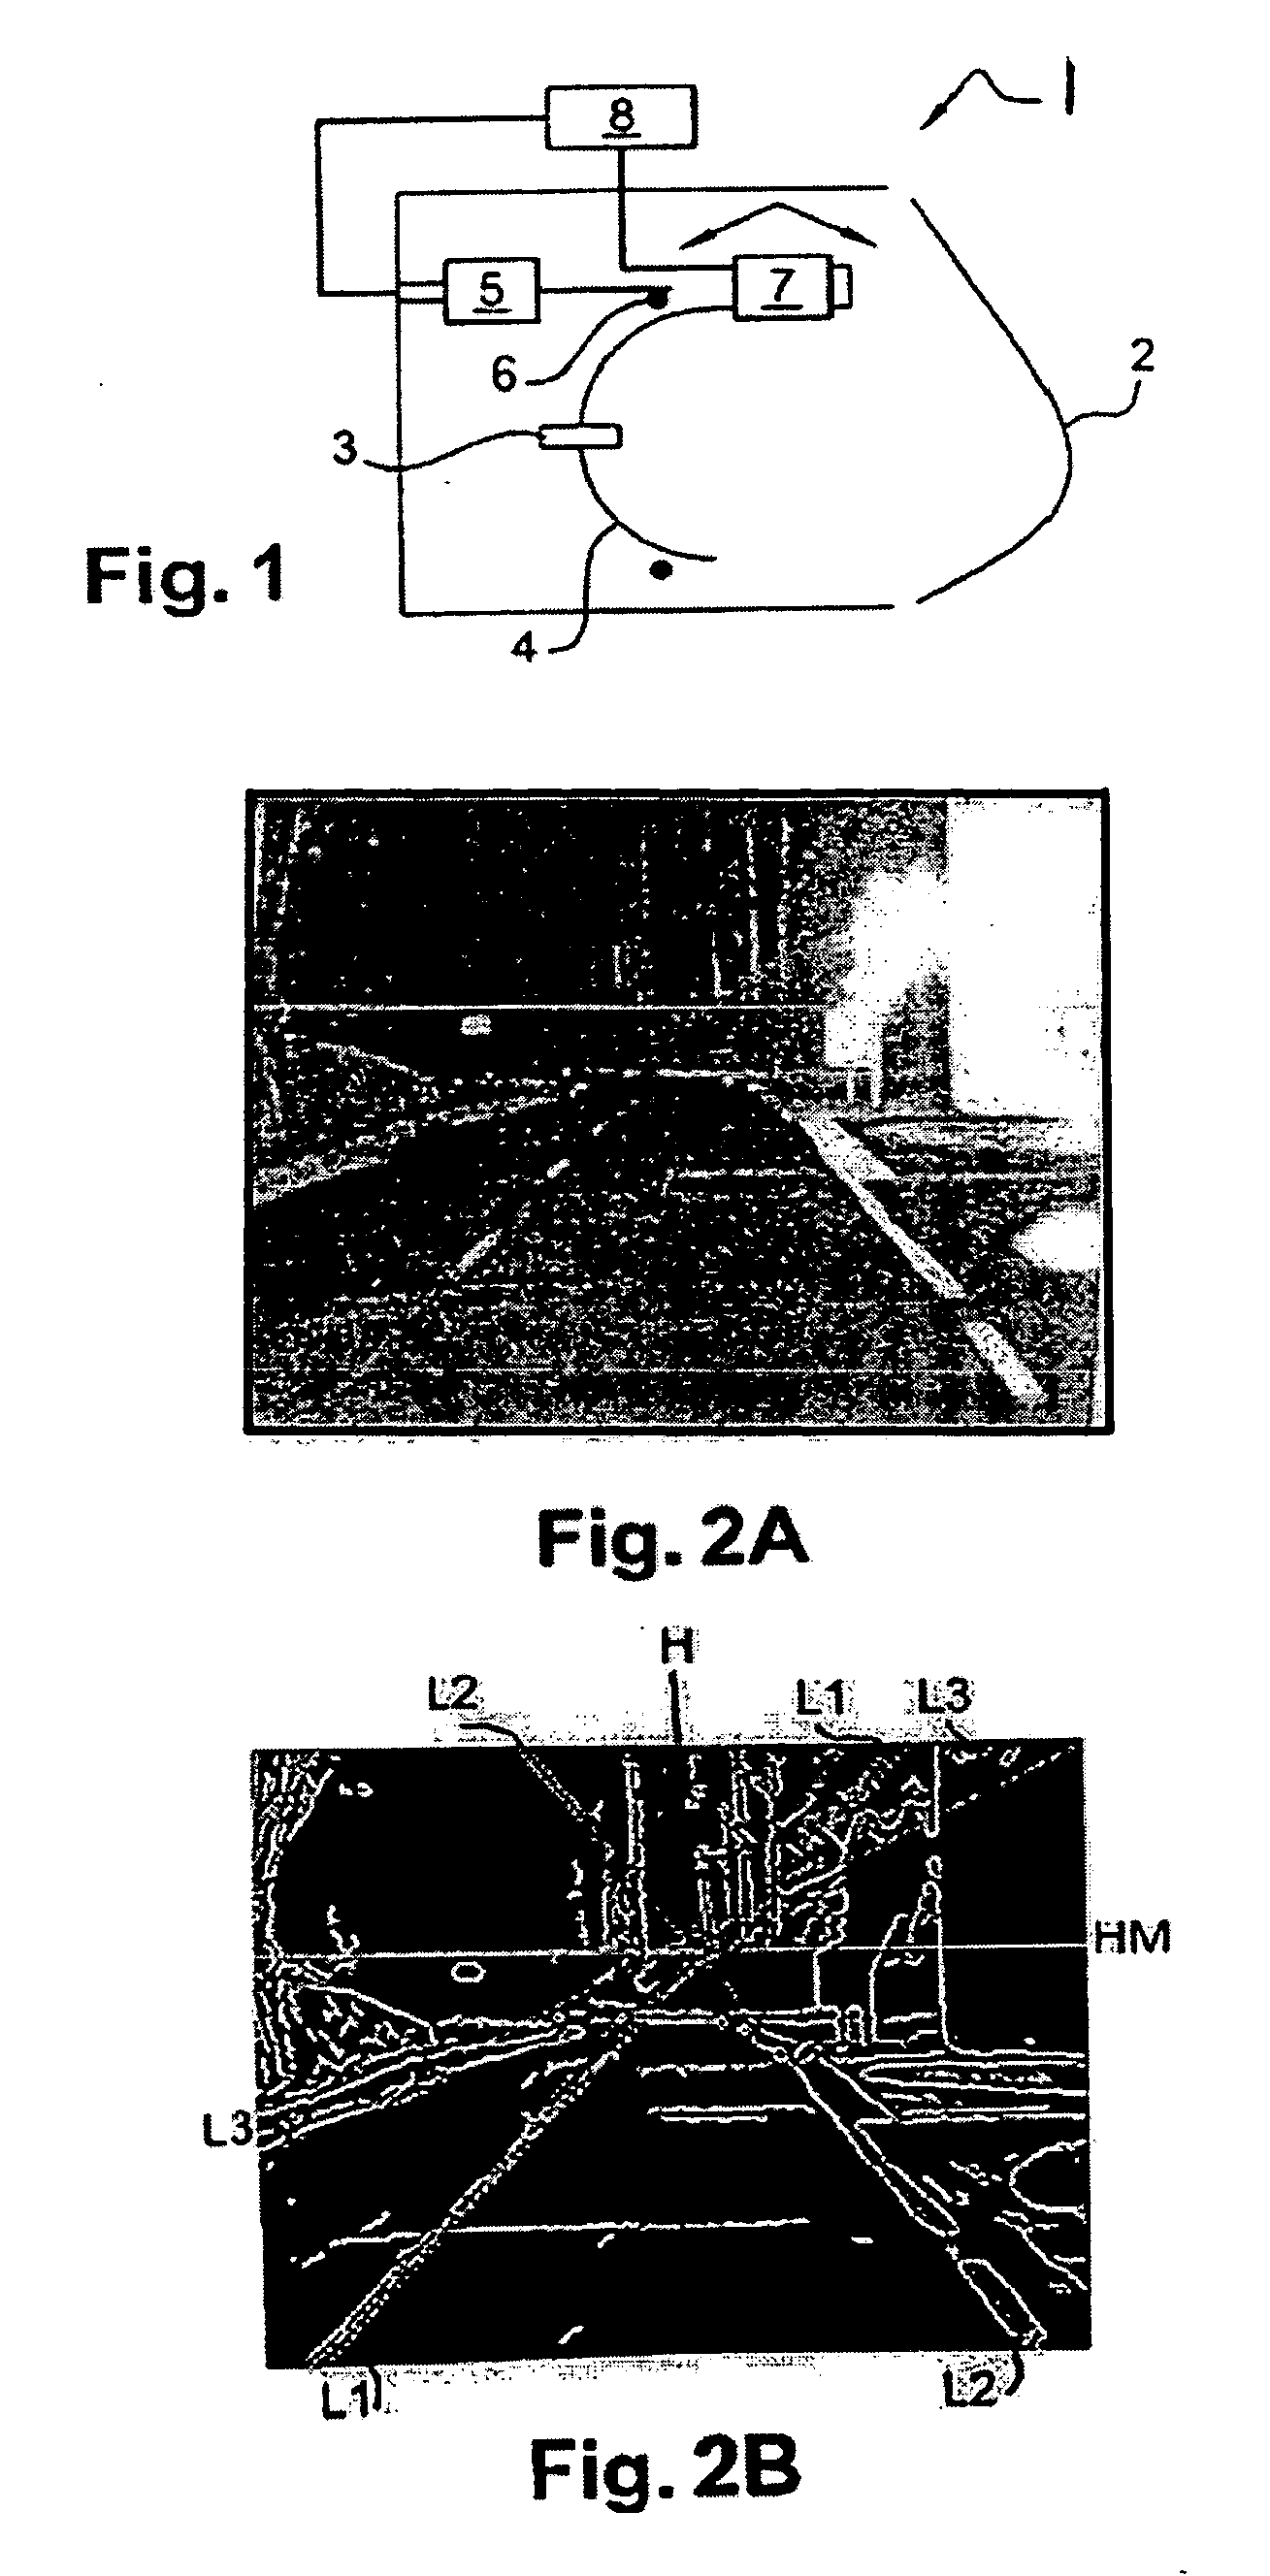 System for controlling the in situ orientation of a vehicle headlamp, and method of use